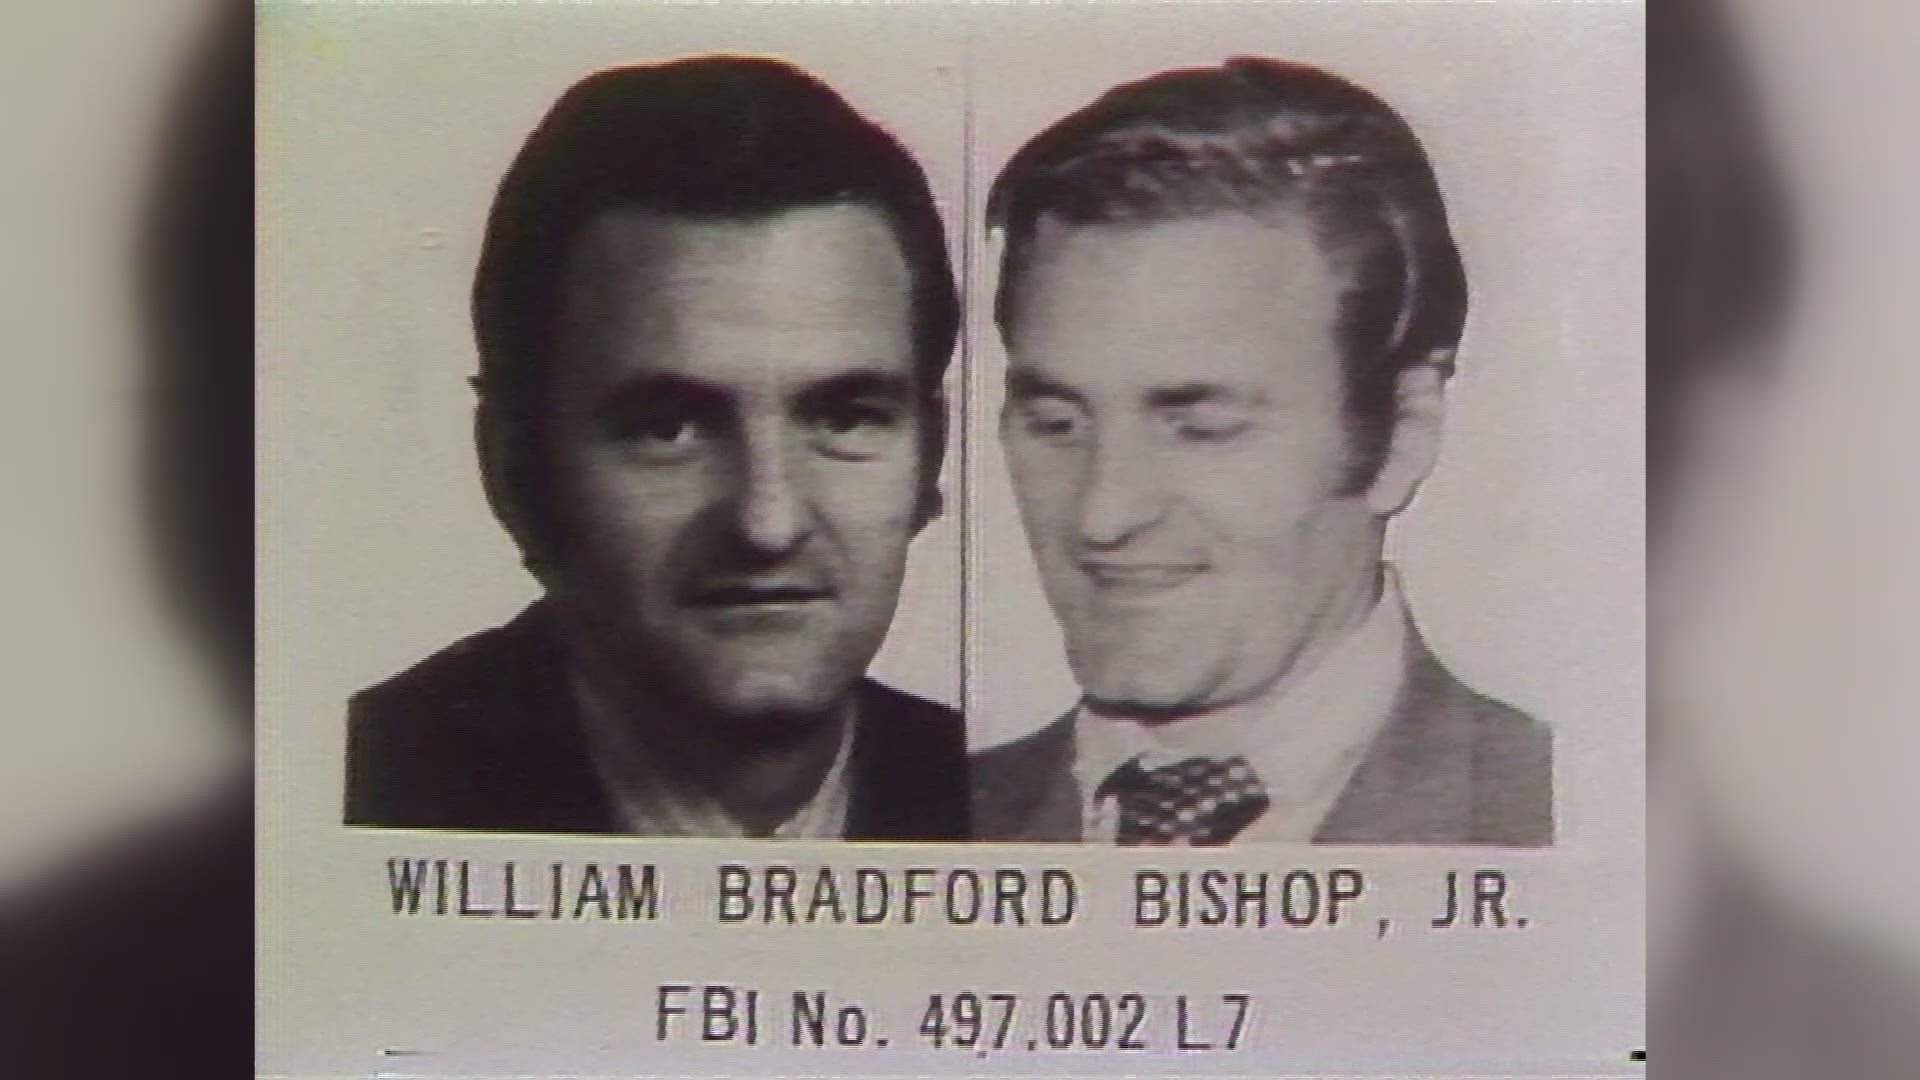 In 1979, WUSA9's Mike Buchanan reported on the new composite sketch of suspected murderer William Bradford Bishop created by D.C. police artist Don Cherry.